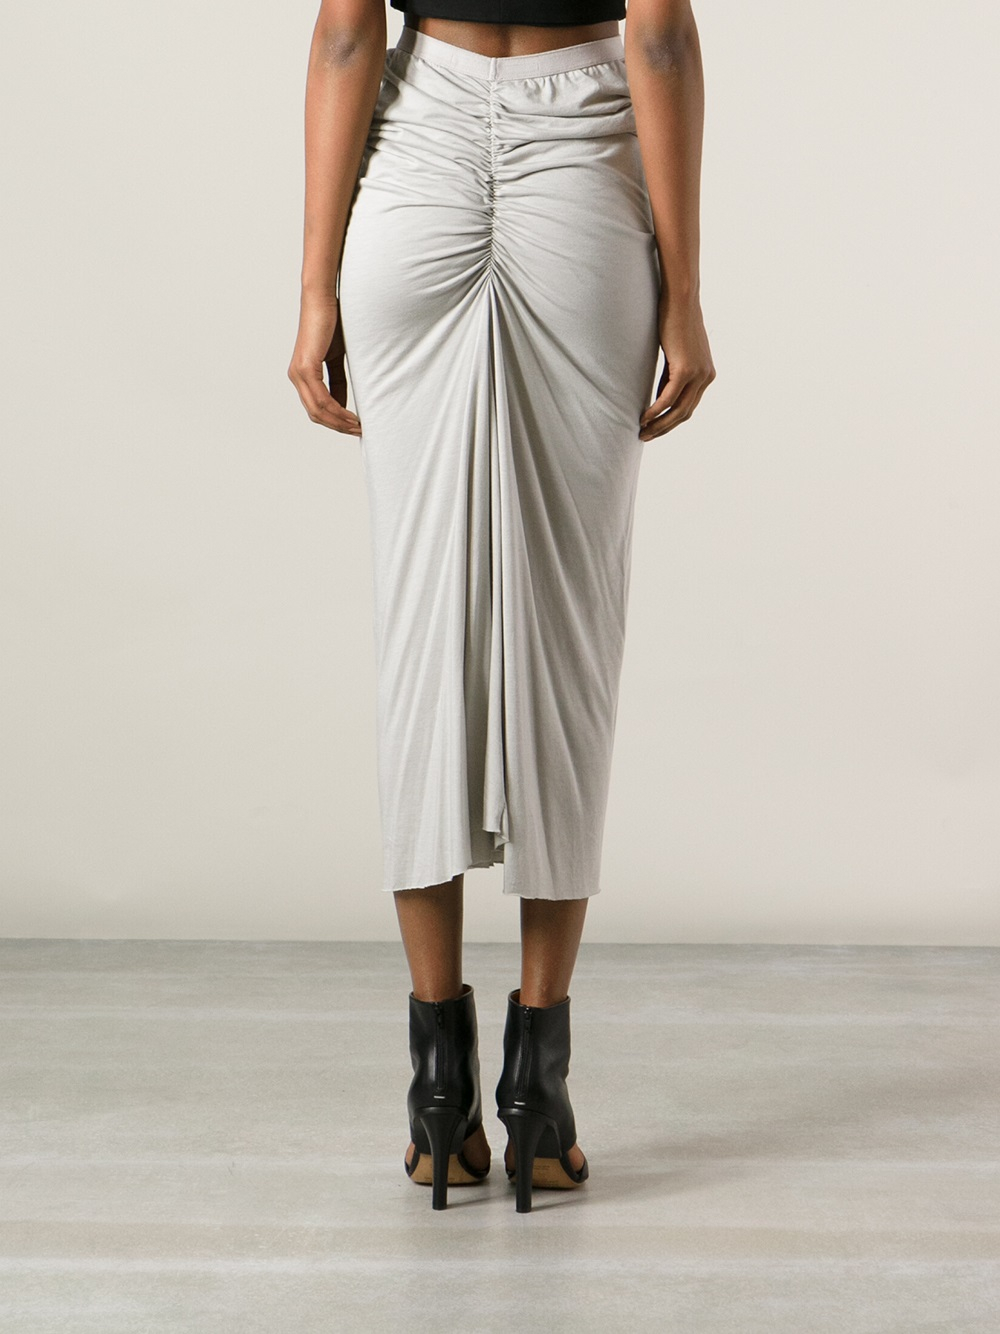 Lyst - Rick Owens Lilies Gathered High Waisted Skirt in Gray